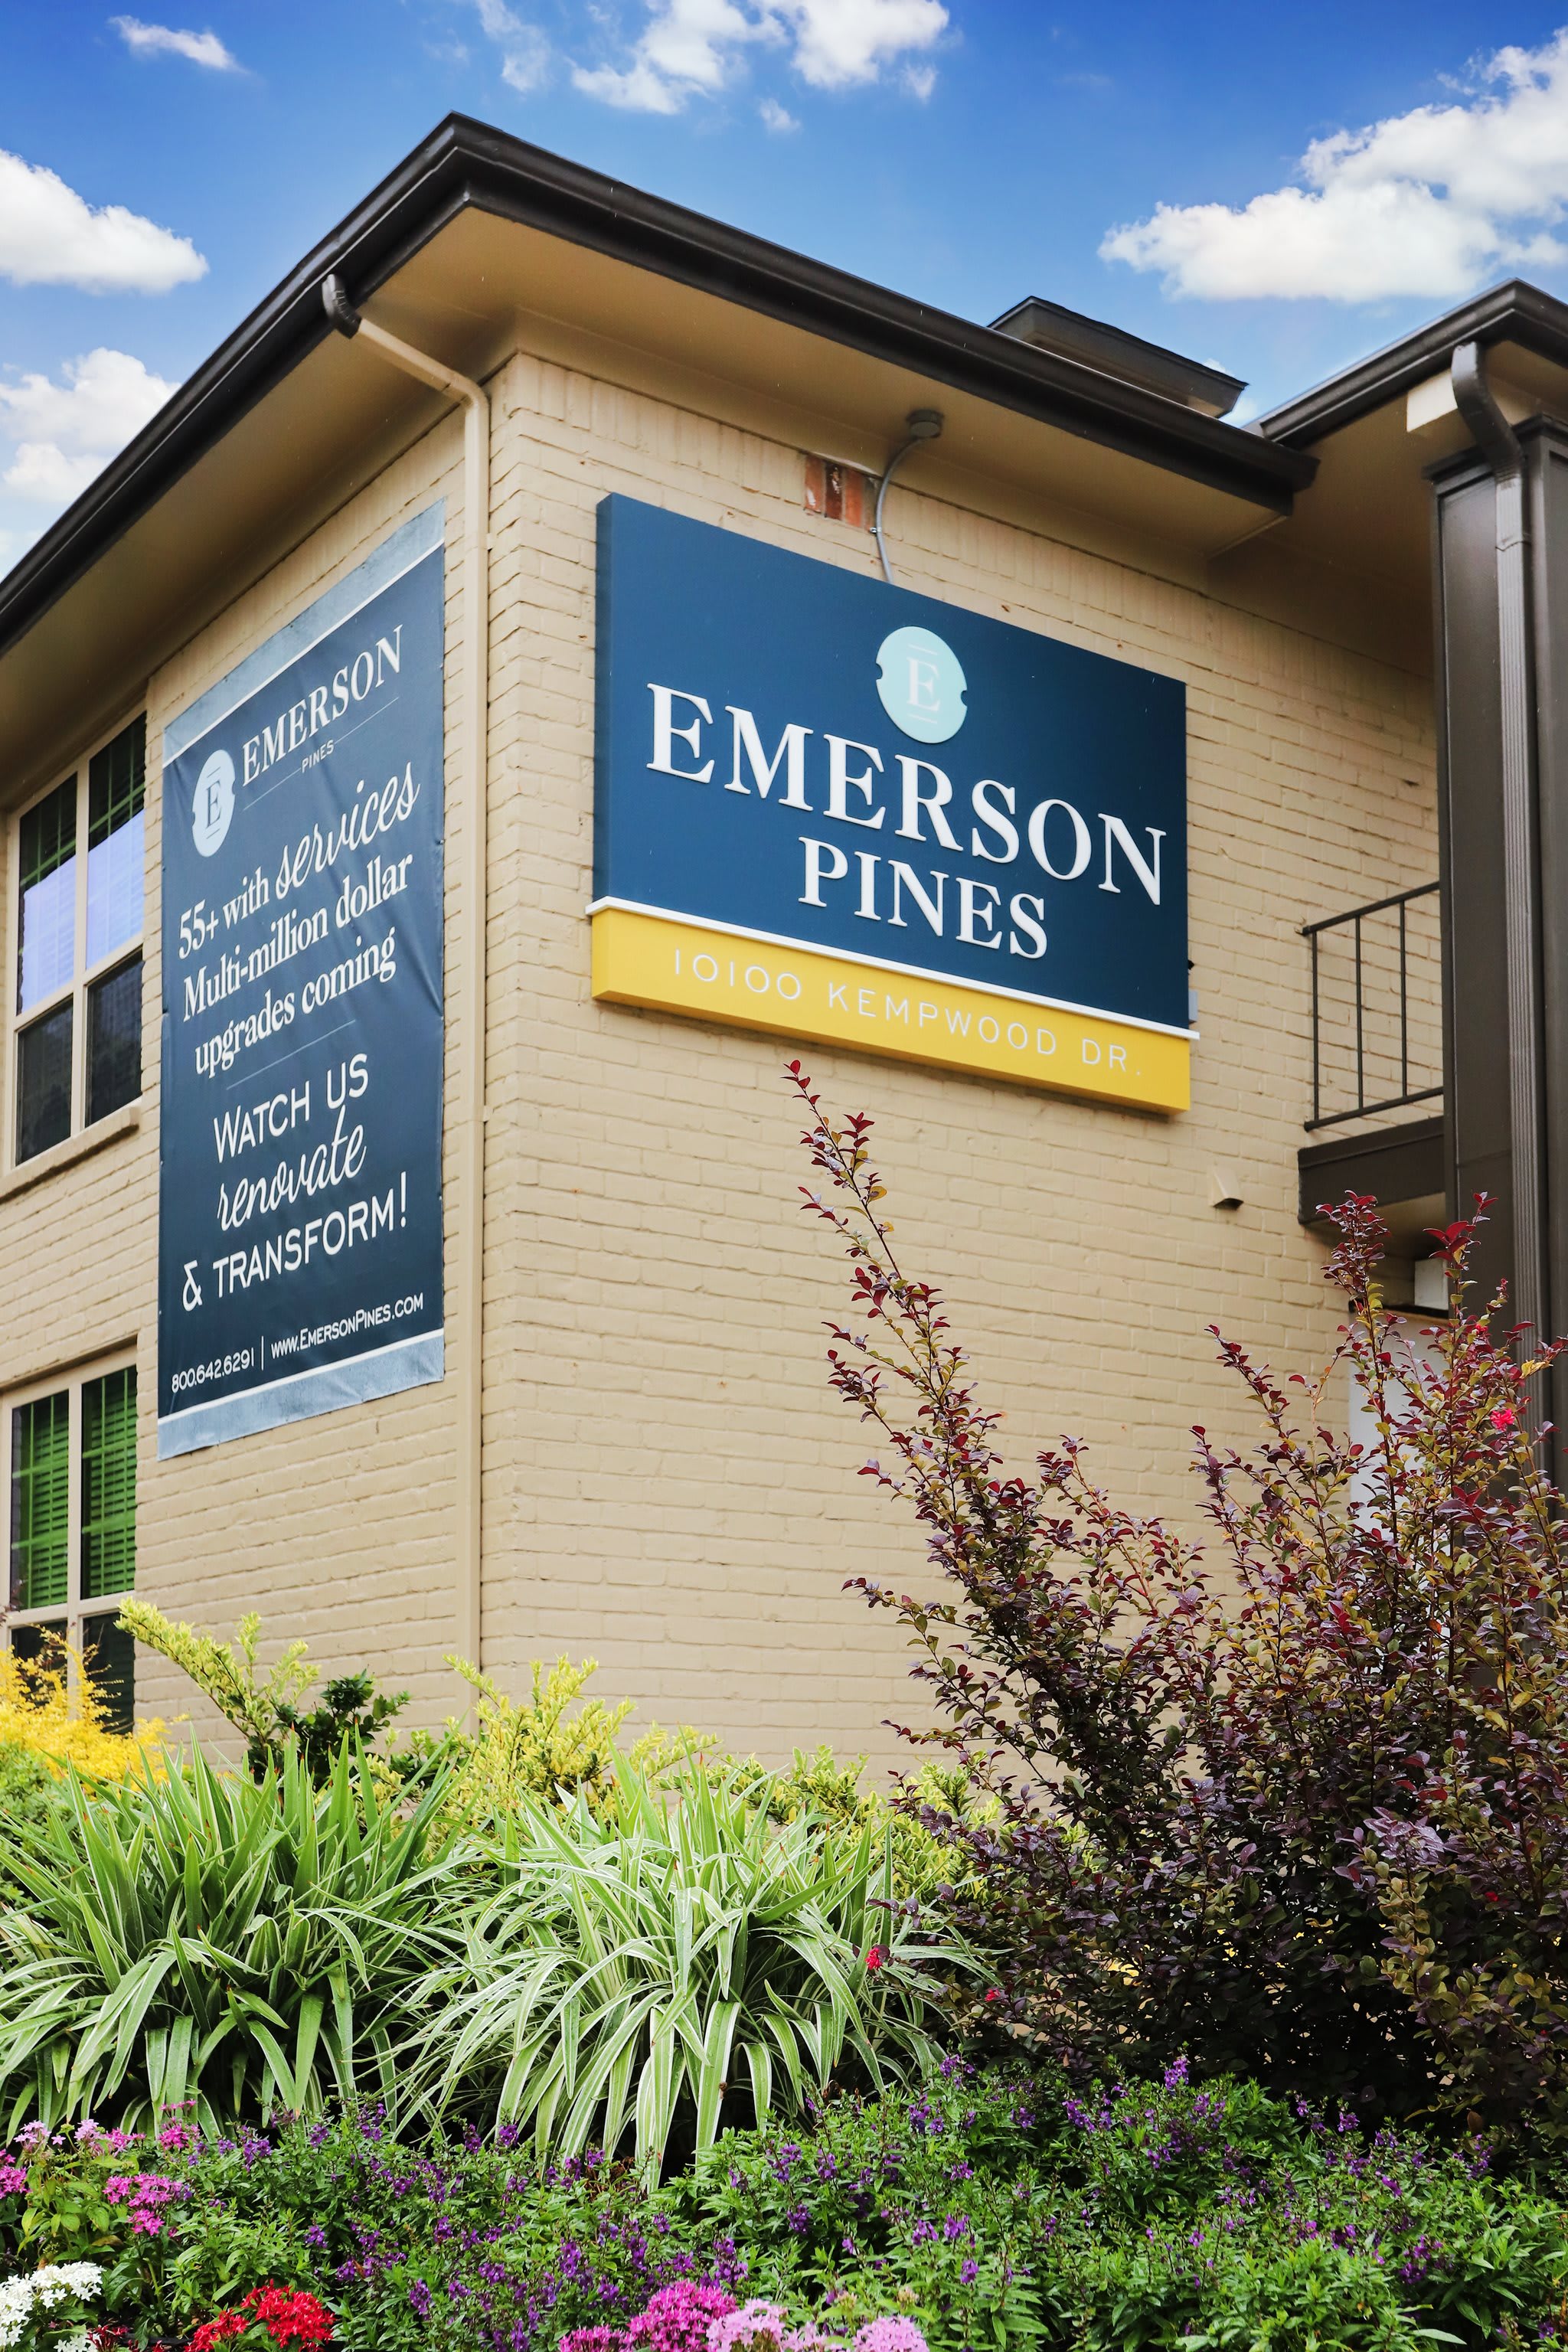 Emerson Pines